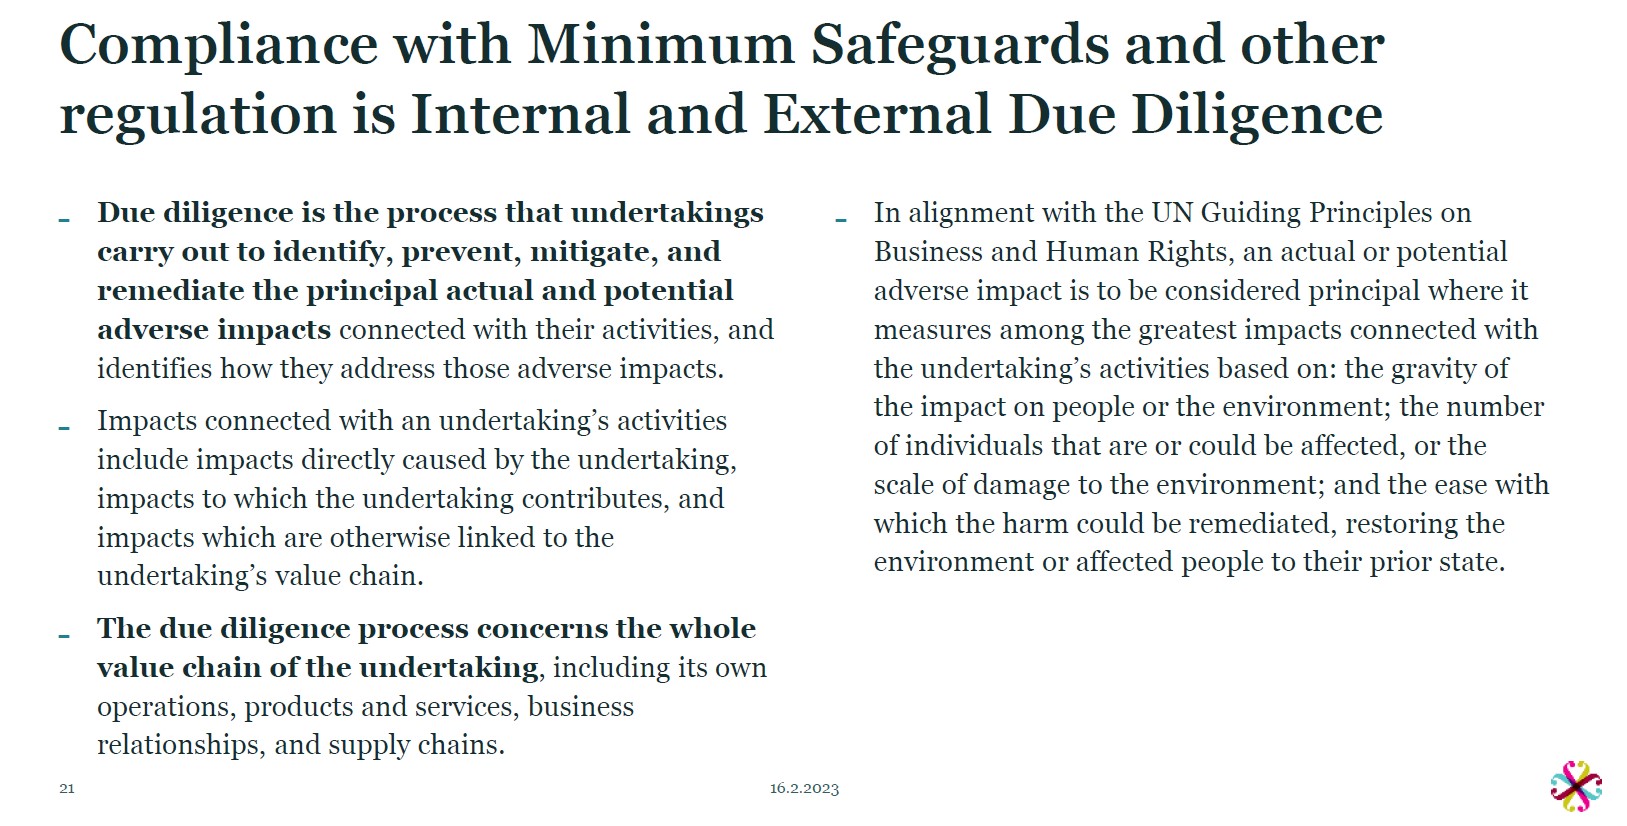 Compliance with Minimum Safeguards and other regulation is Internal and External Due Diligence